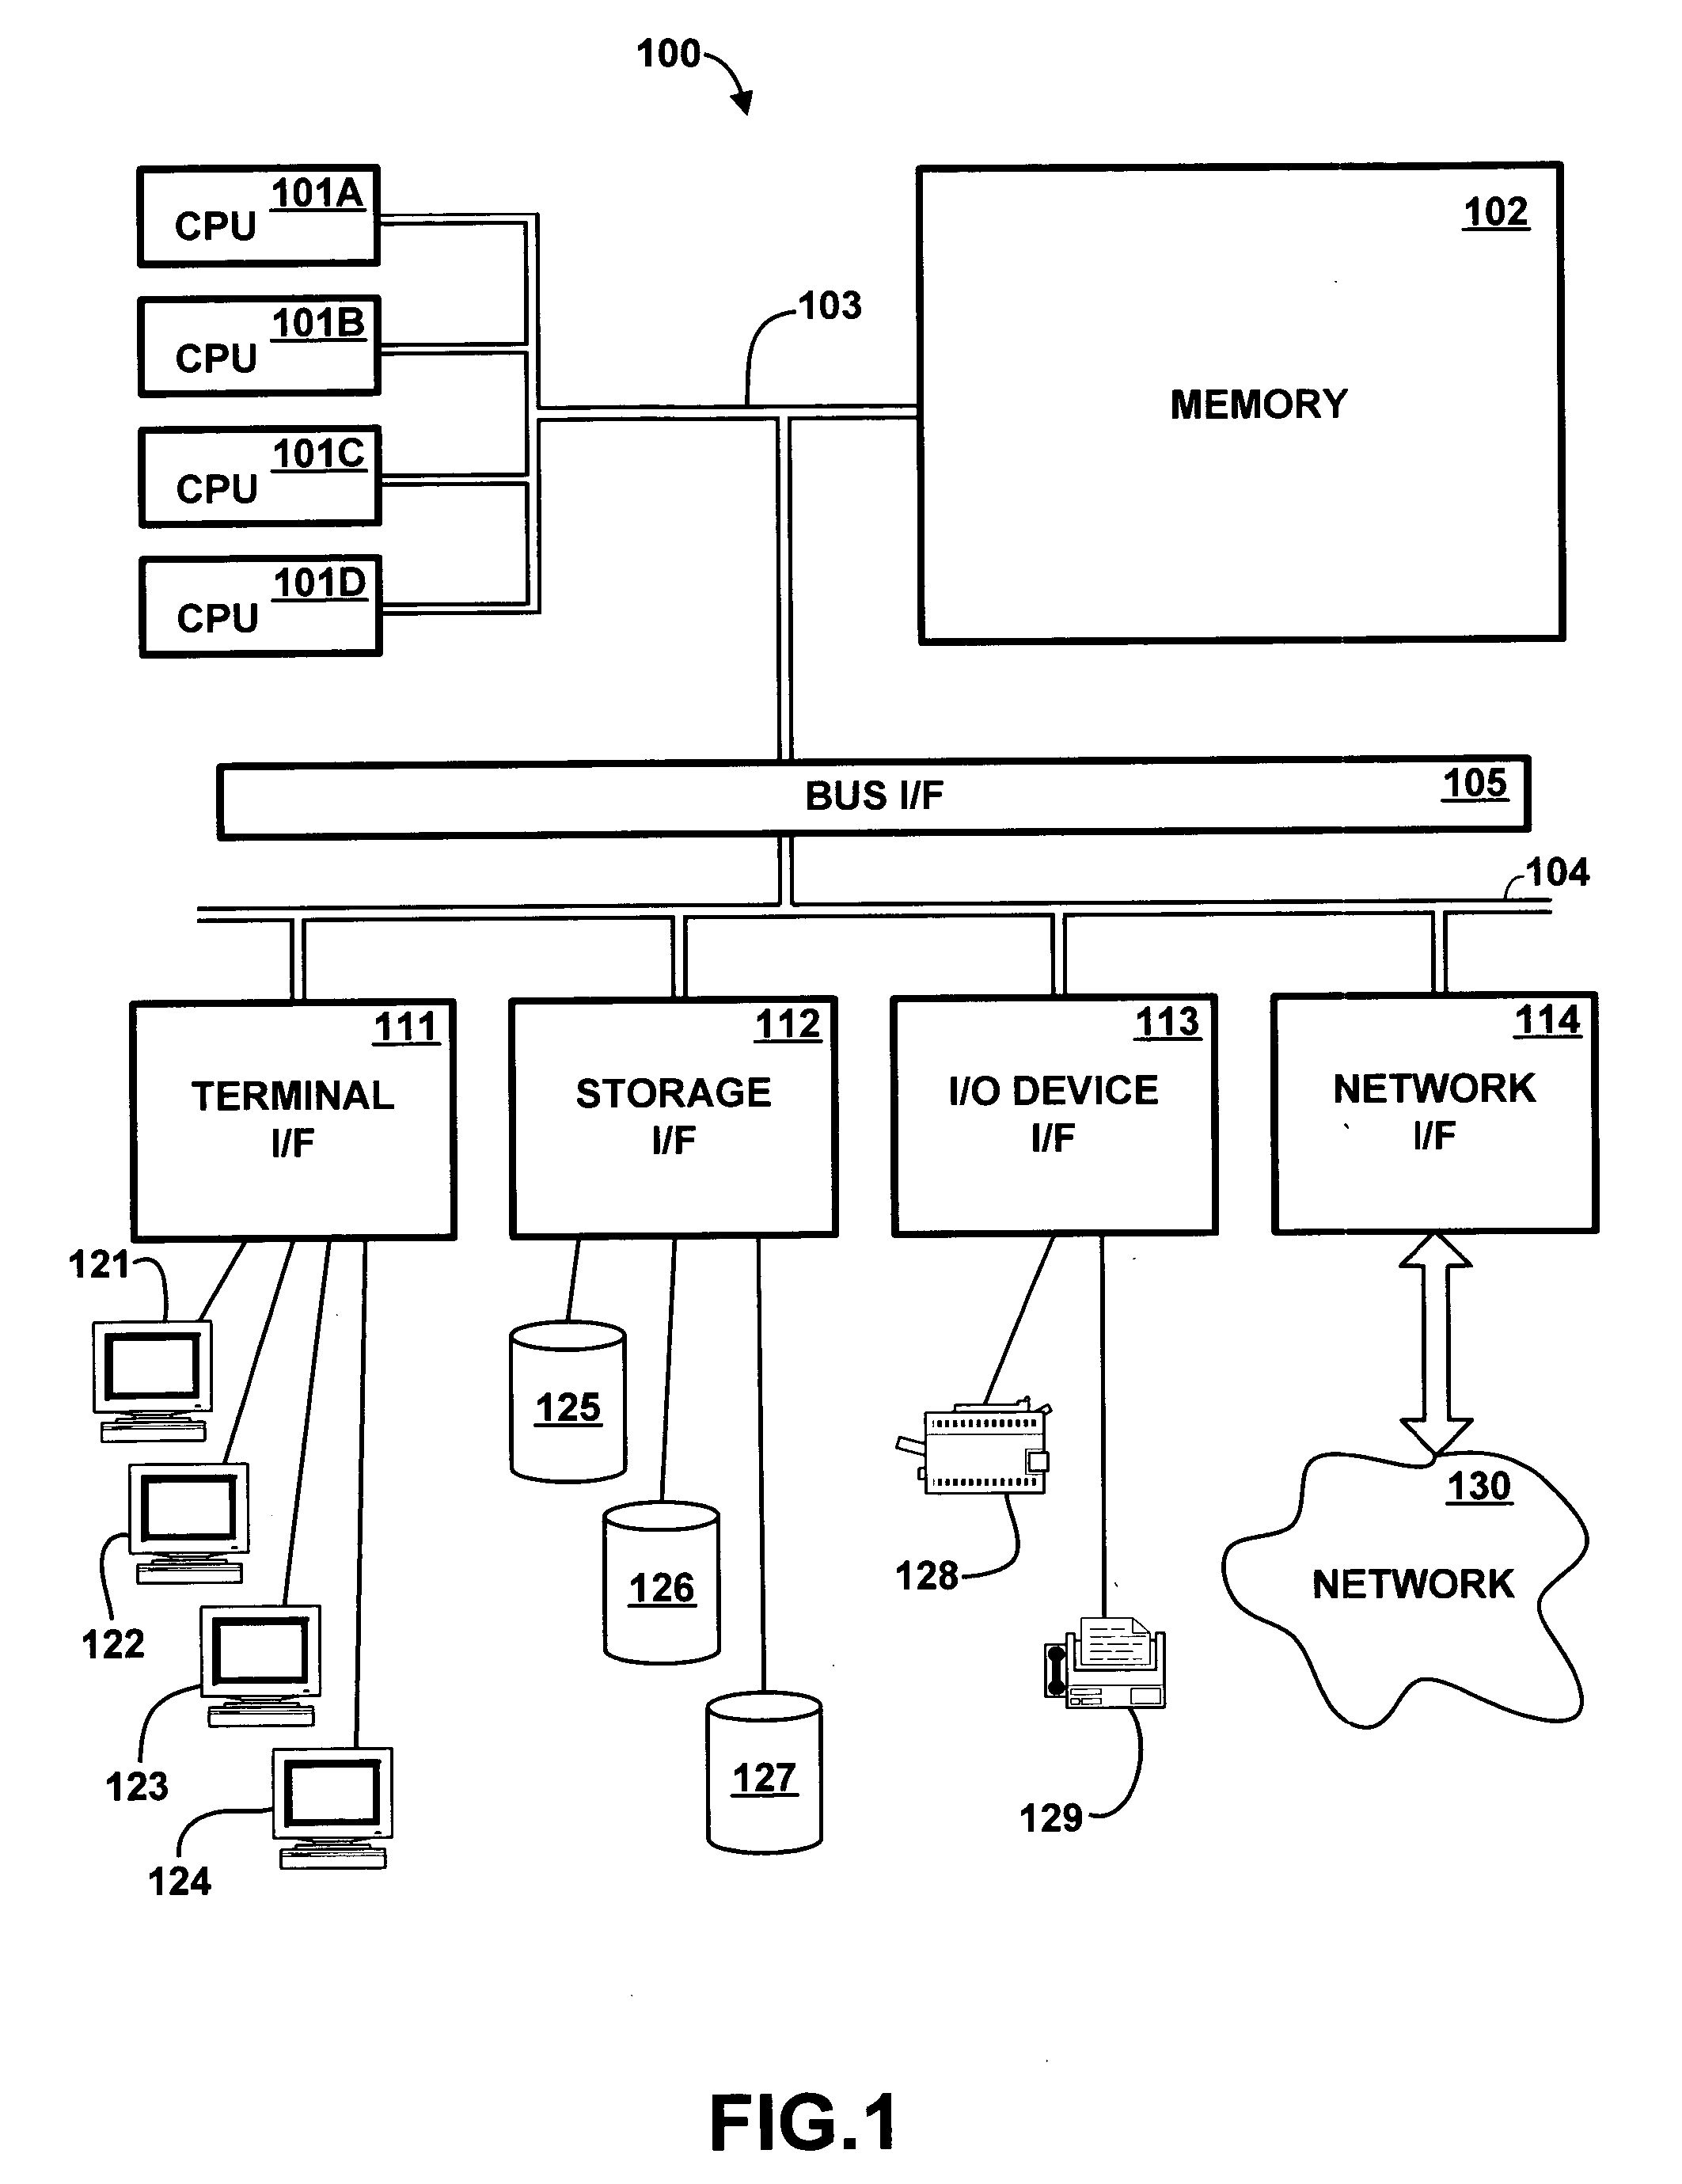 Apparatus and method for pre-fetching data to cached memory using persistent historical page table data